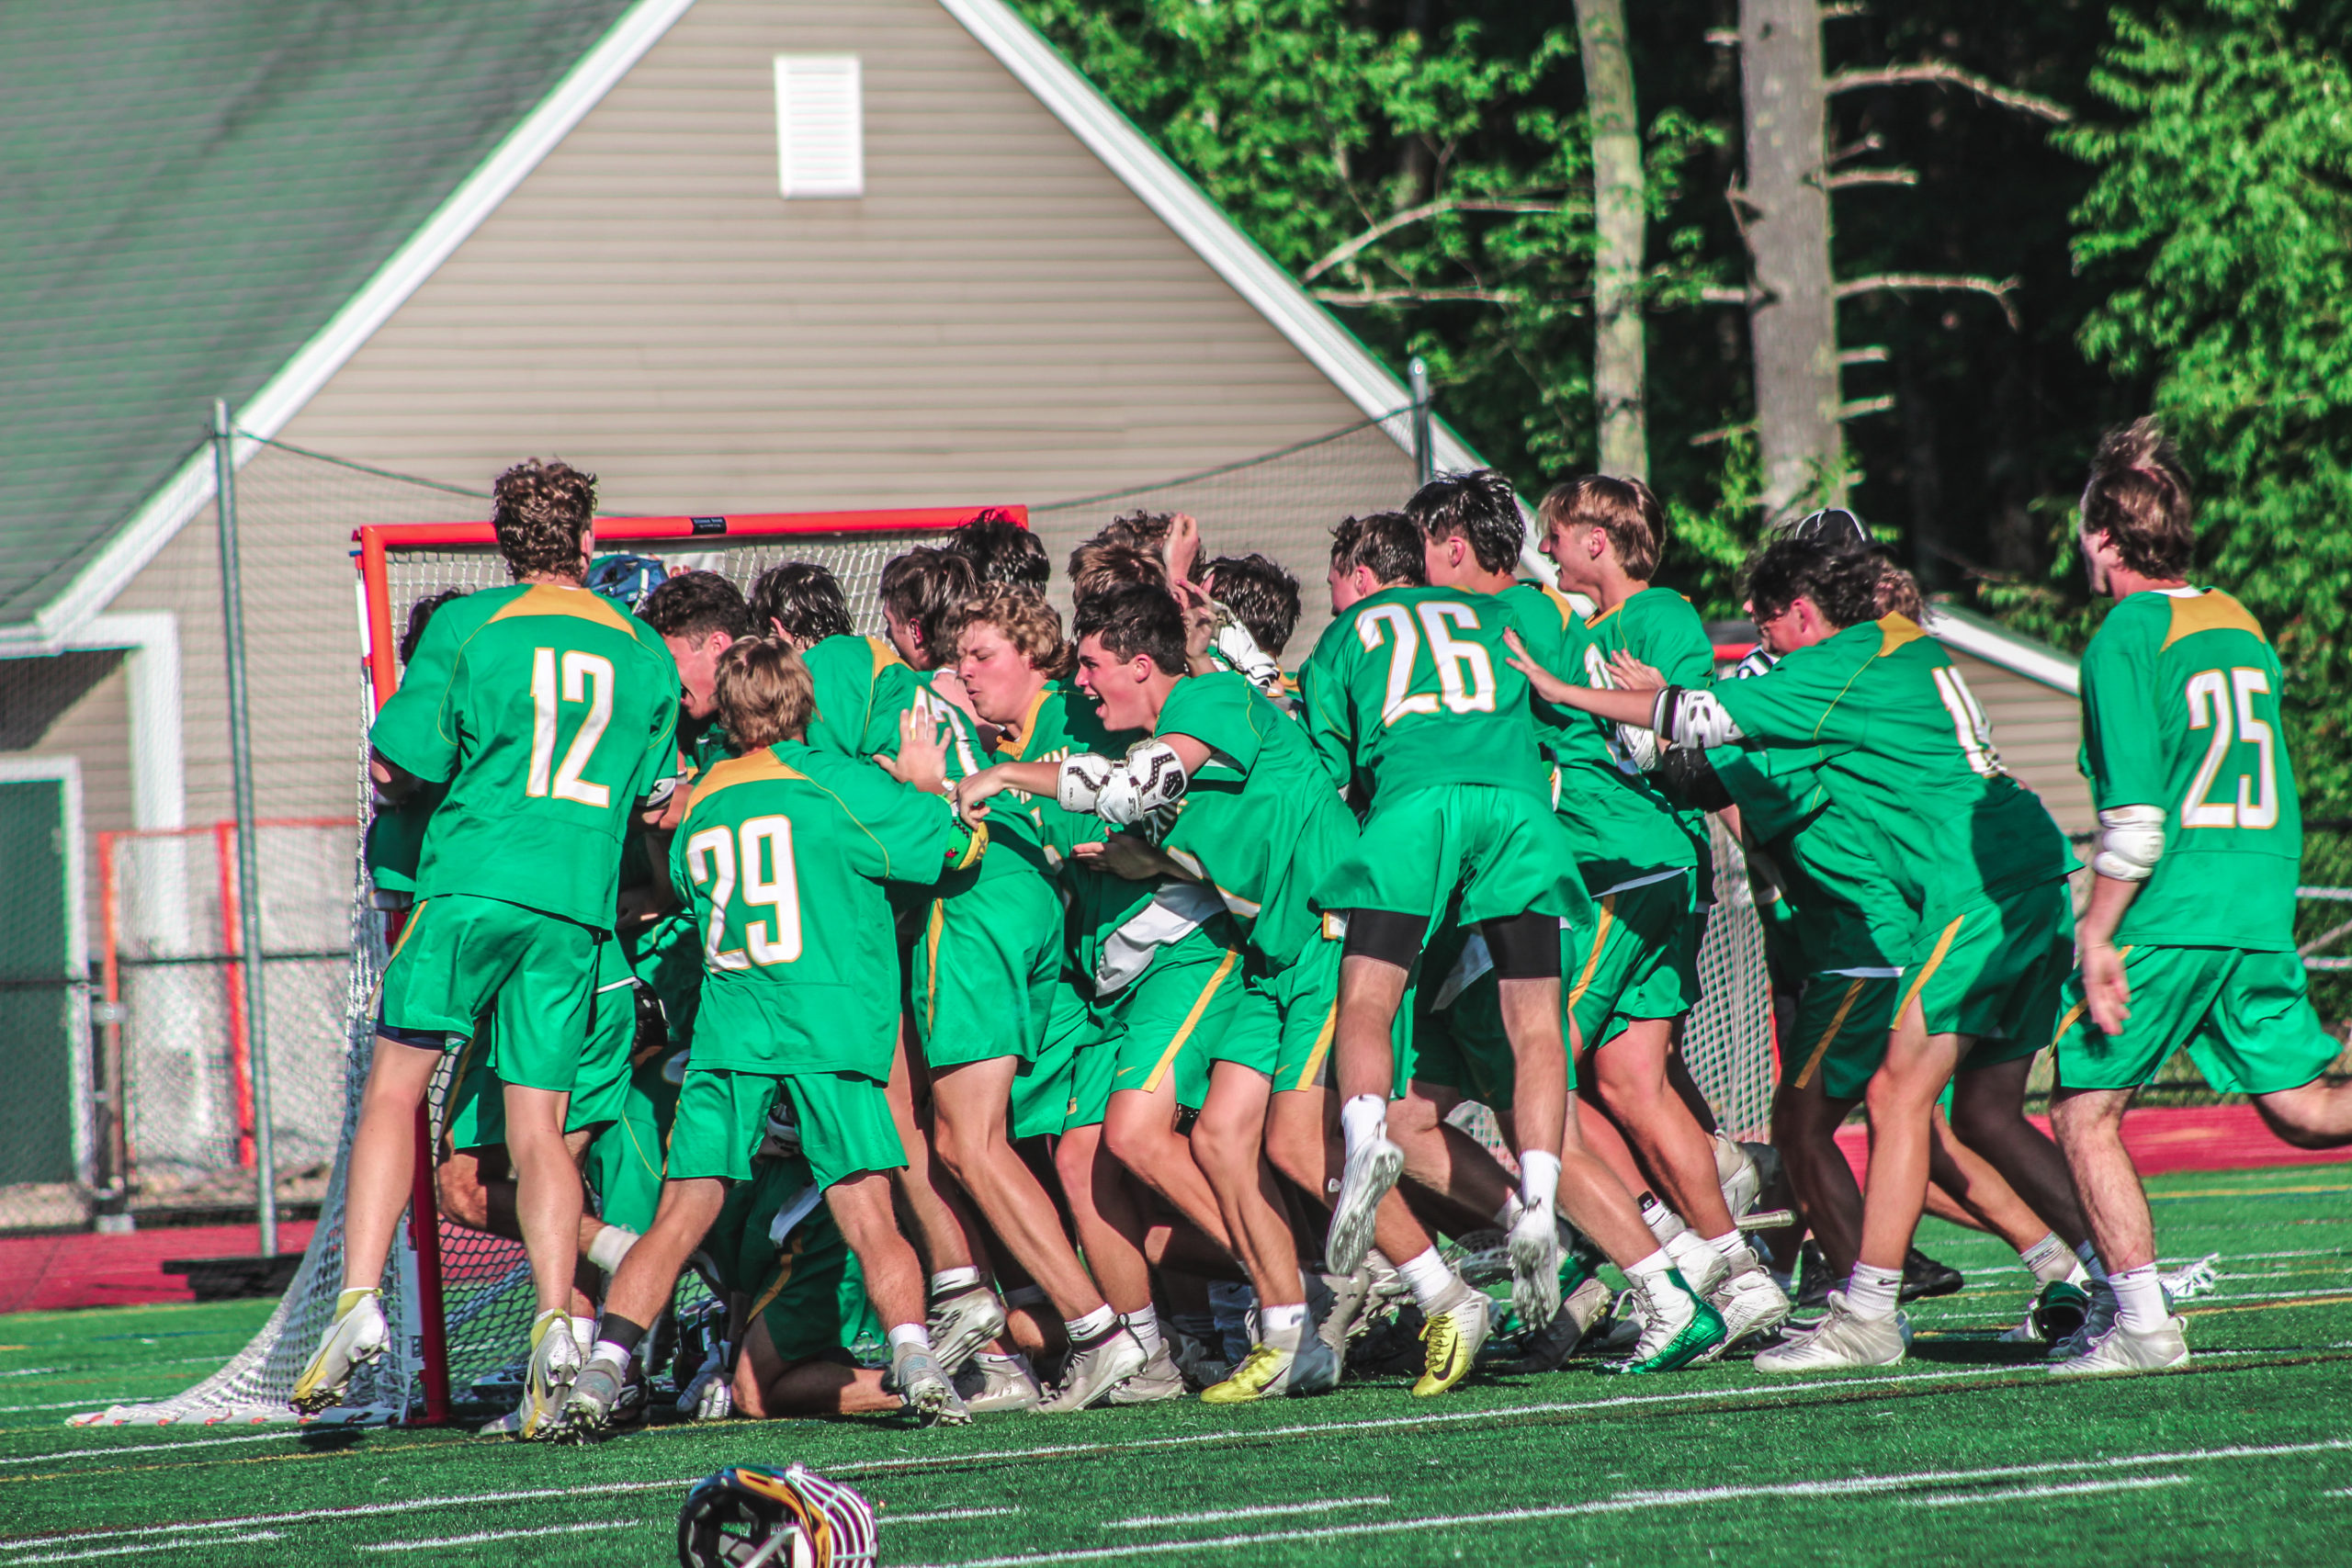 No. 24 Guertin (N.H.) Completes Their Perfect Season With an